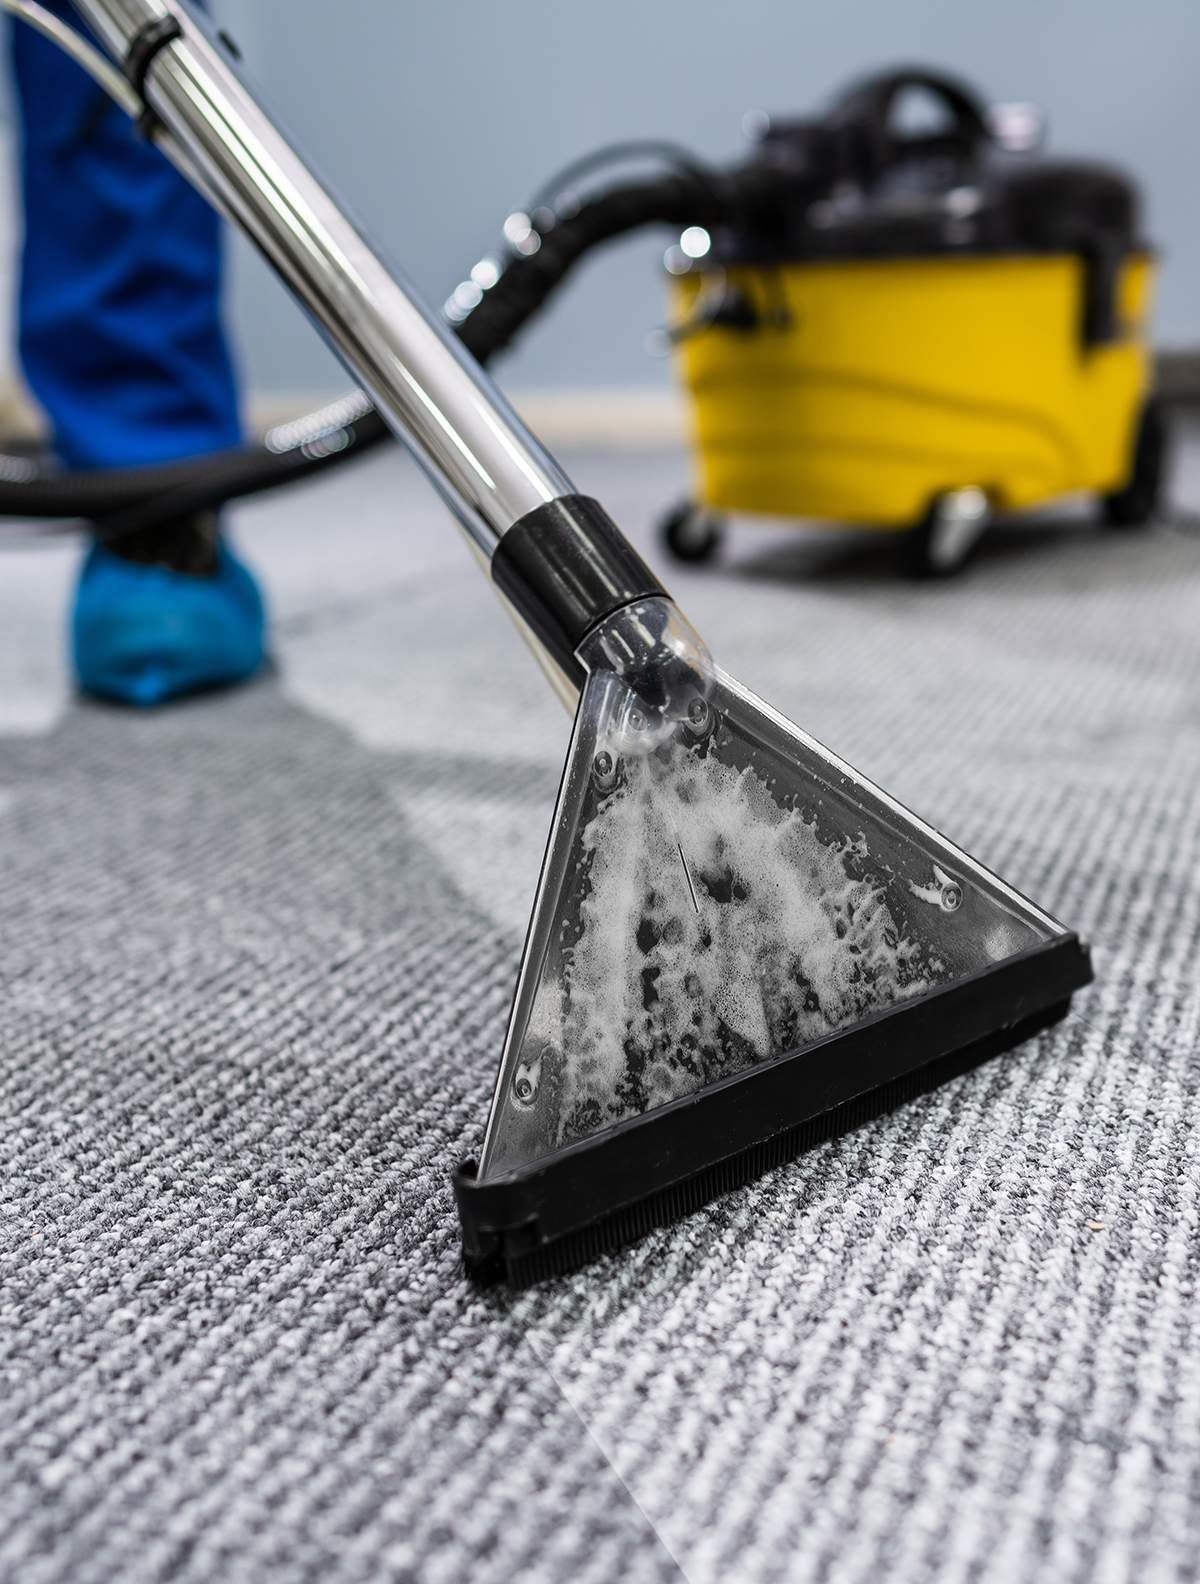 Carpet Cleaning Service in Knoxville, TN